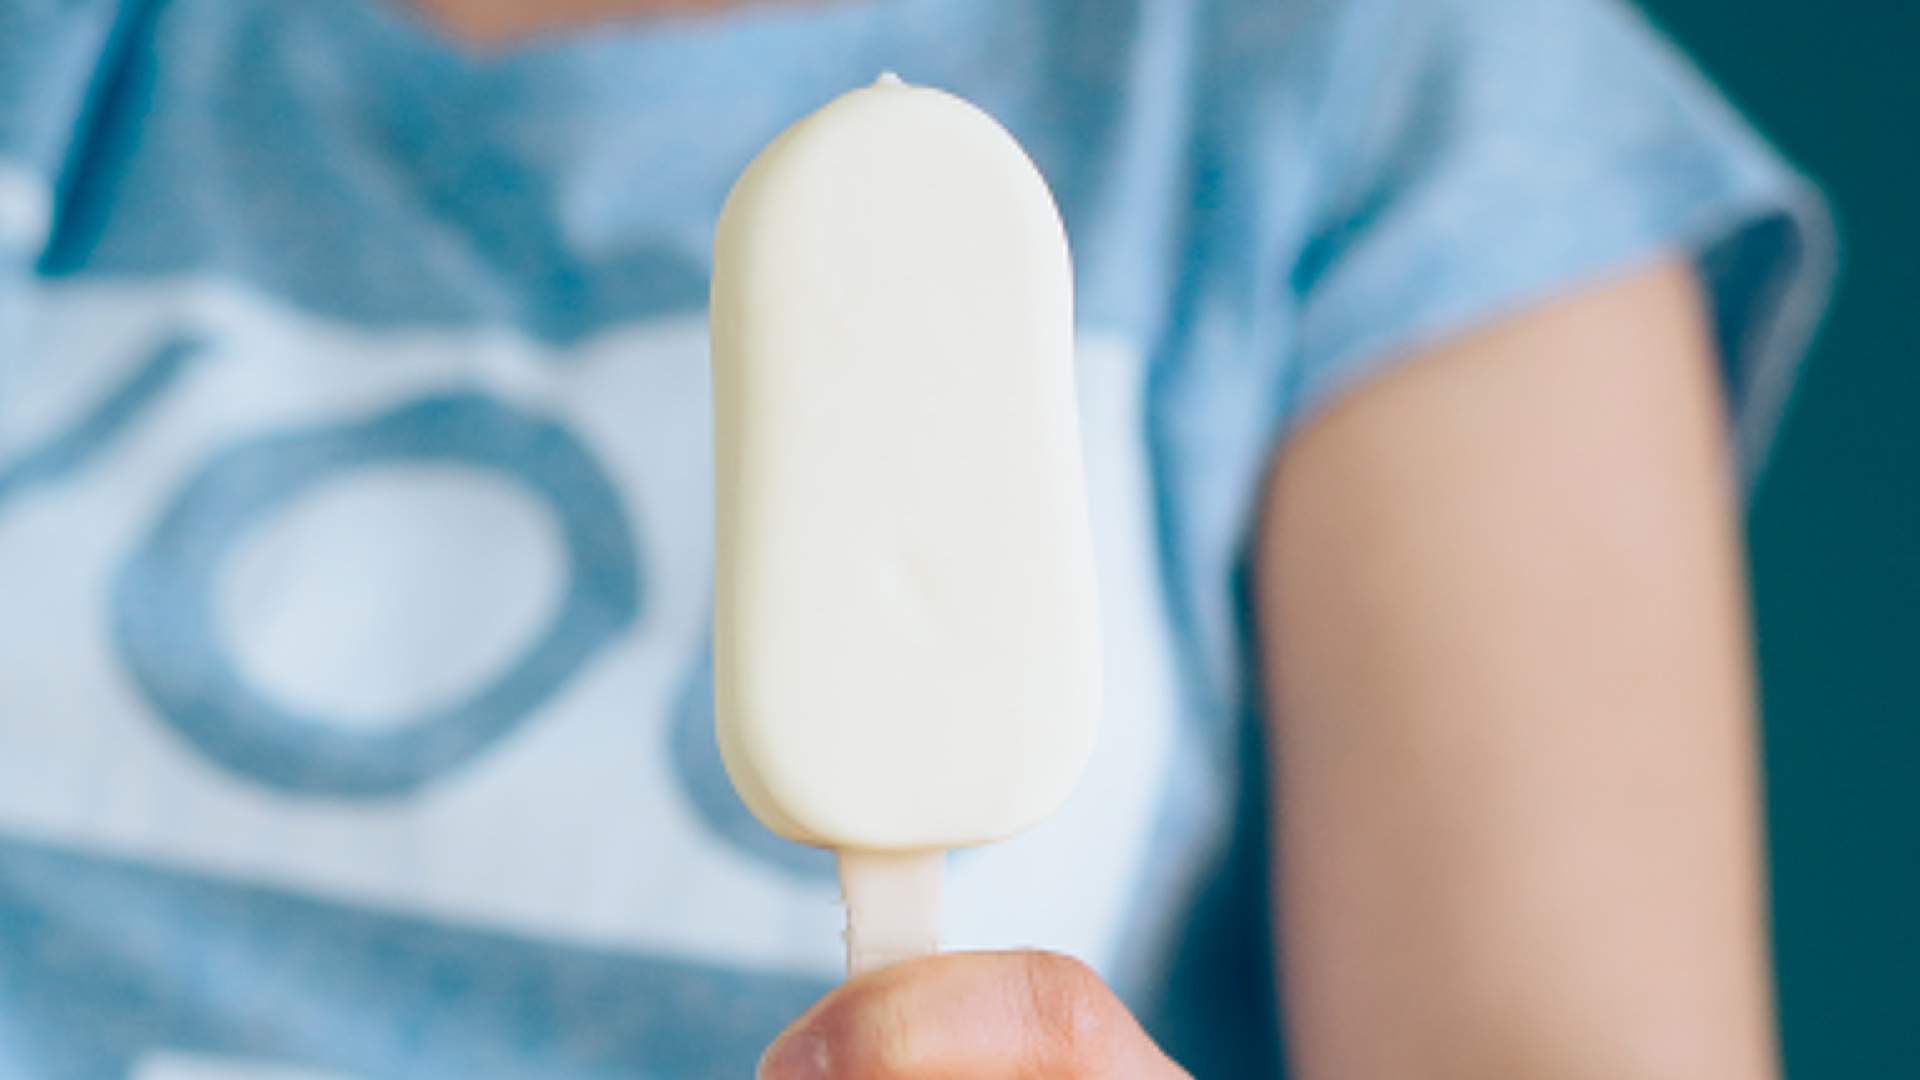 A Japanese Company Has Invented Non-Melting Ice Cream